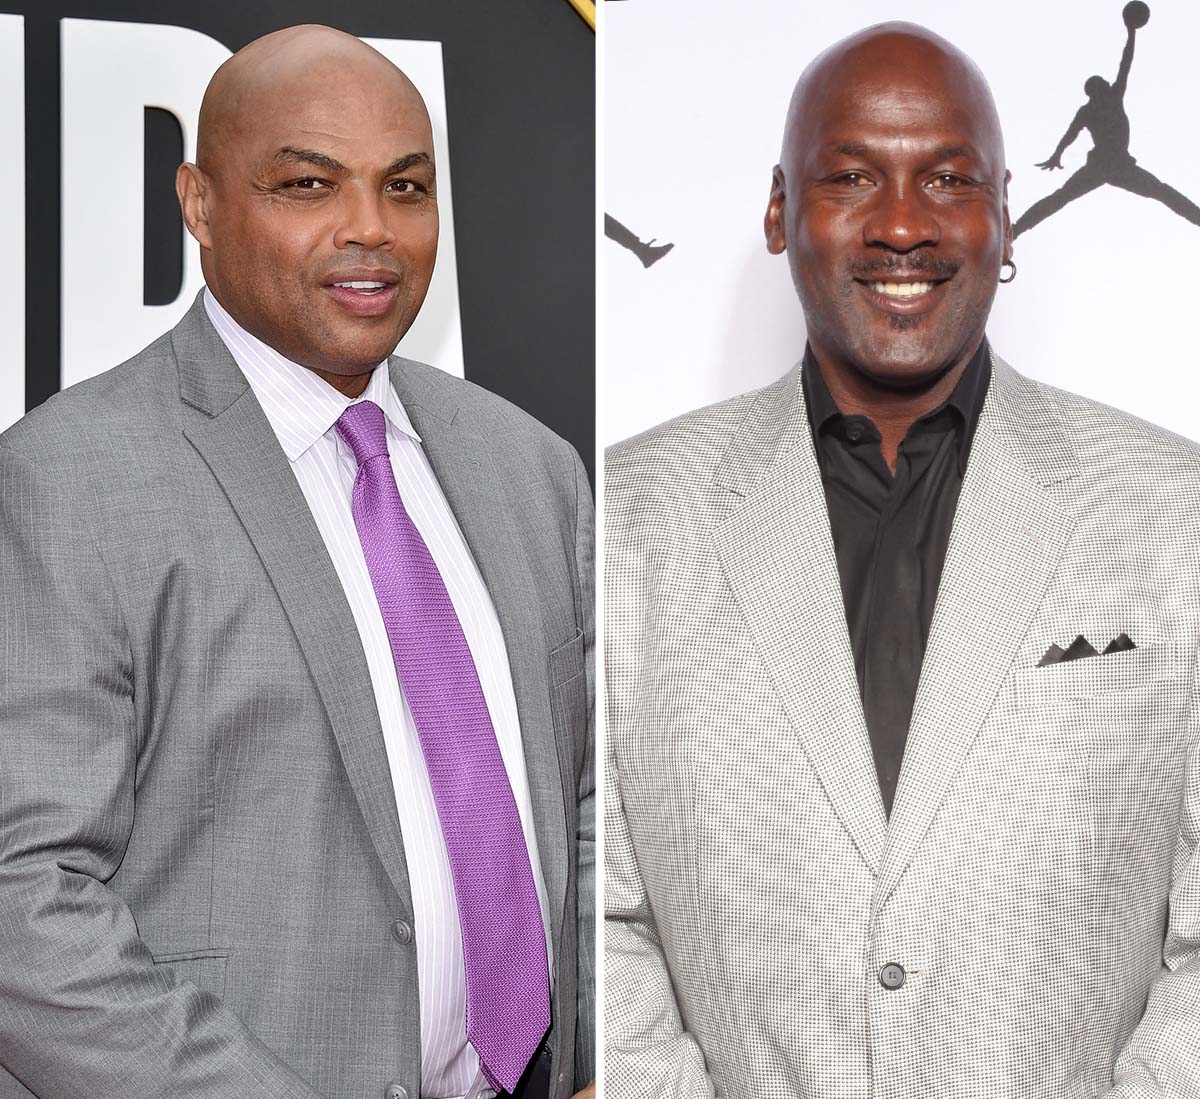 Here's Why Michael Jordan Is No Longer Friends with Charles Barkley